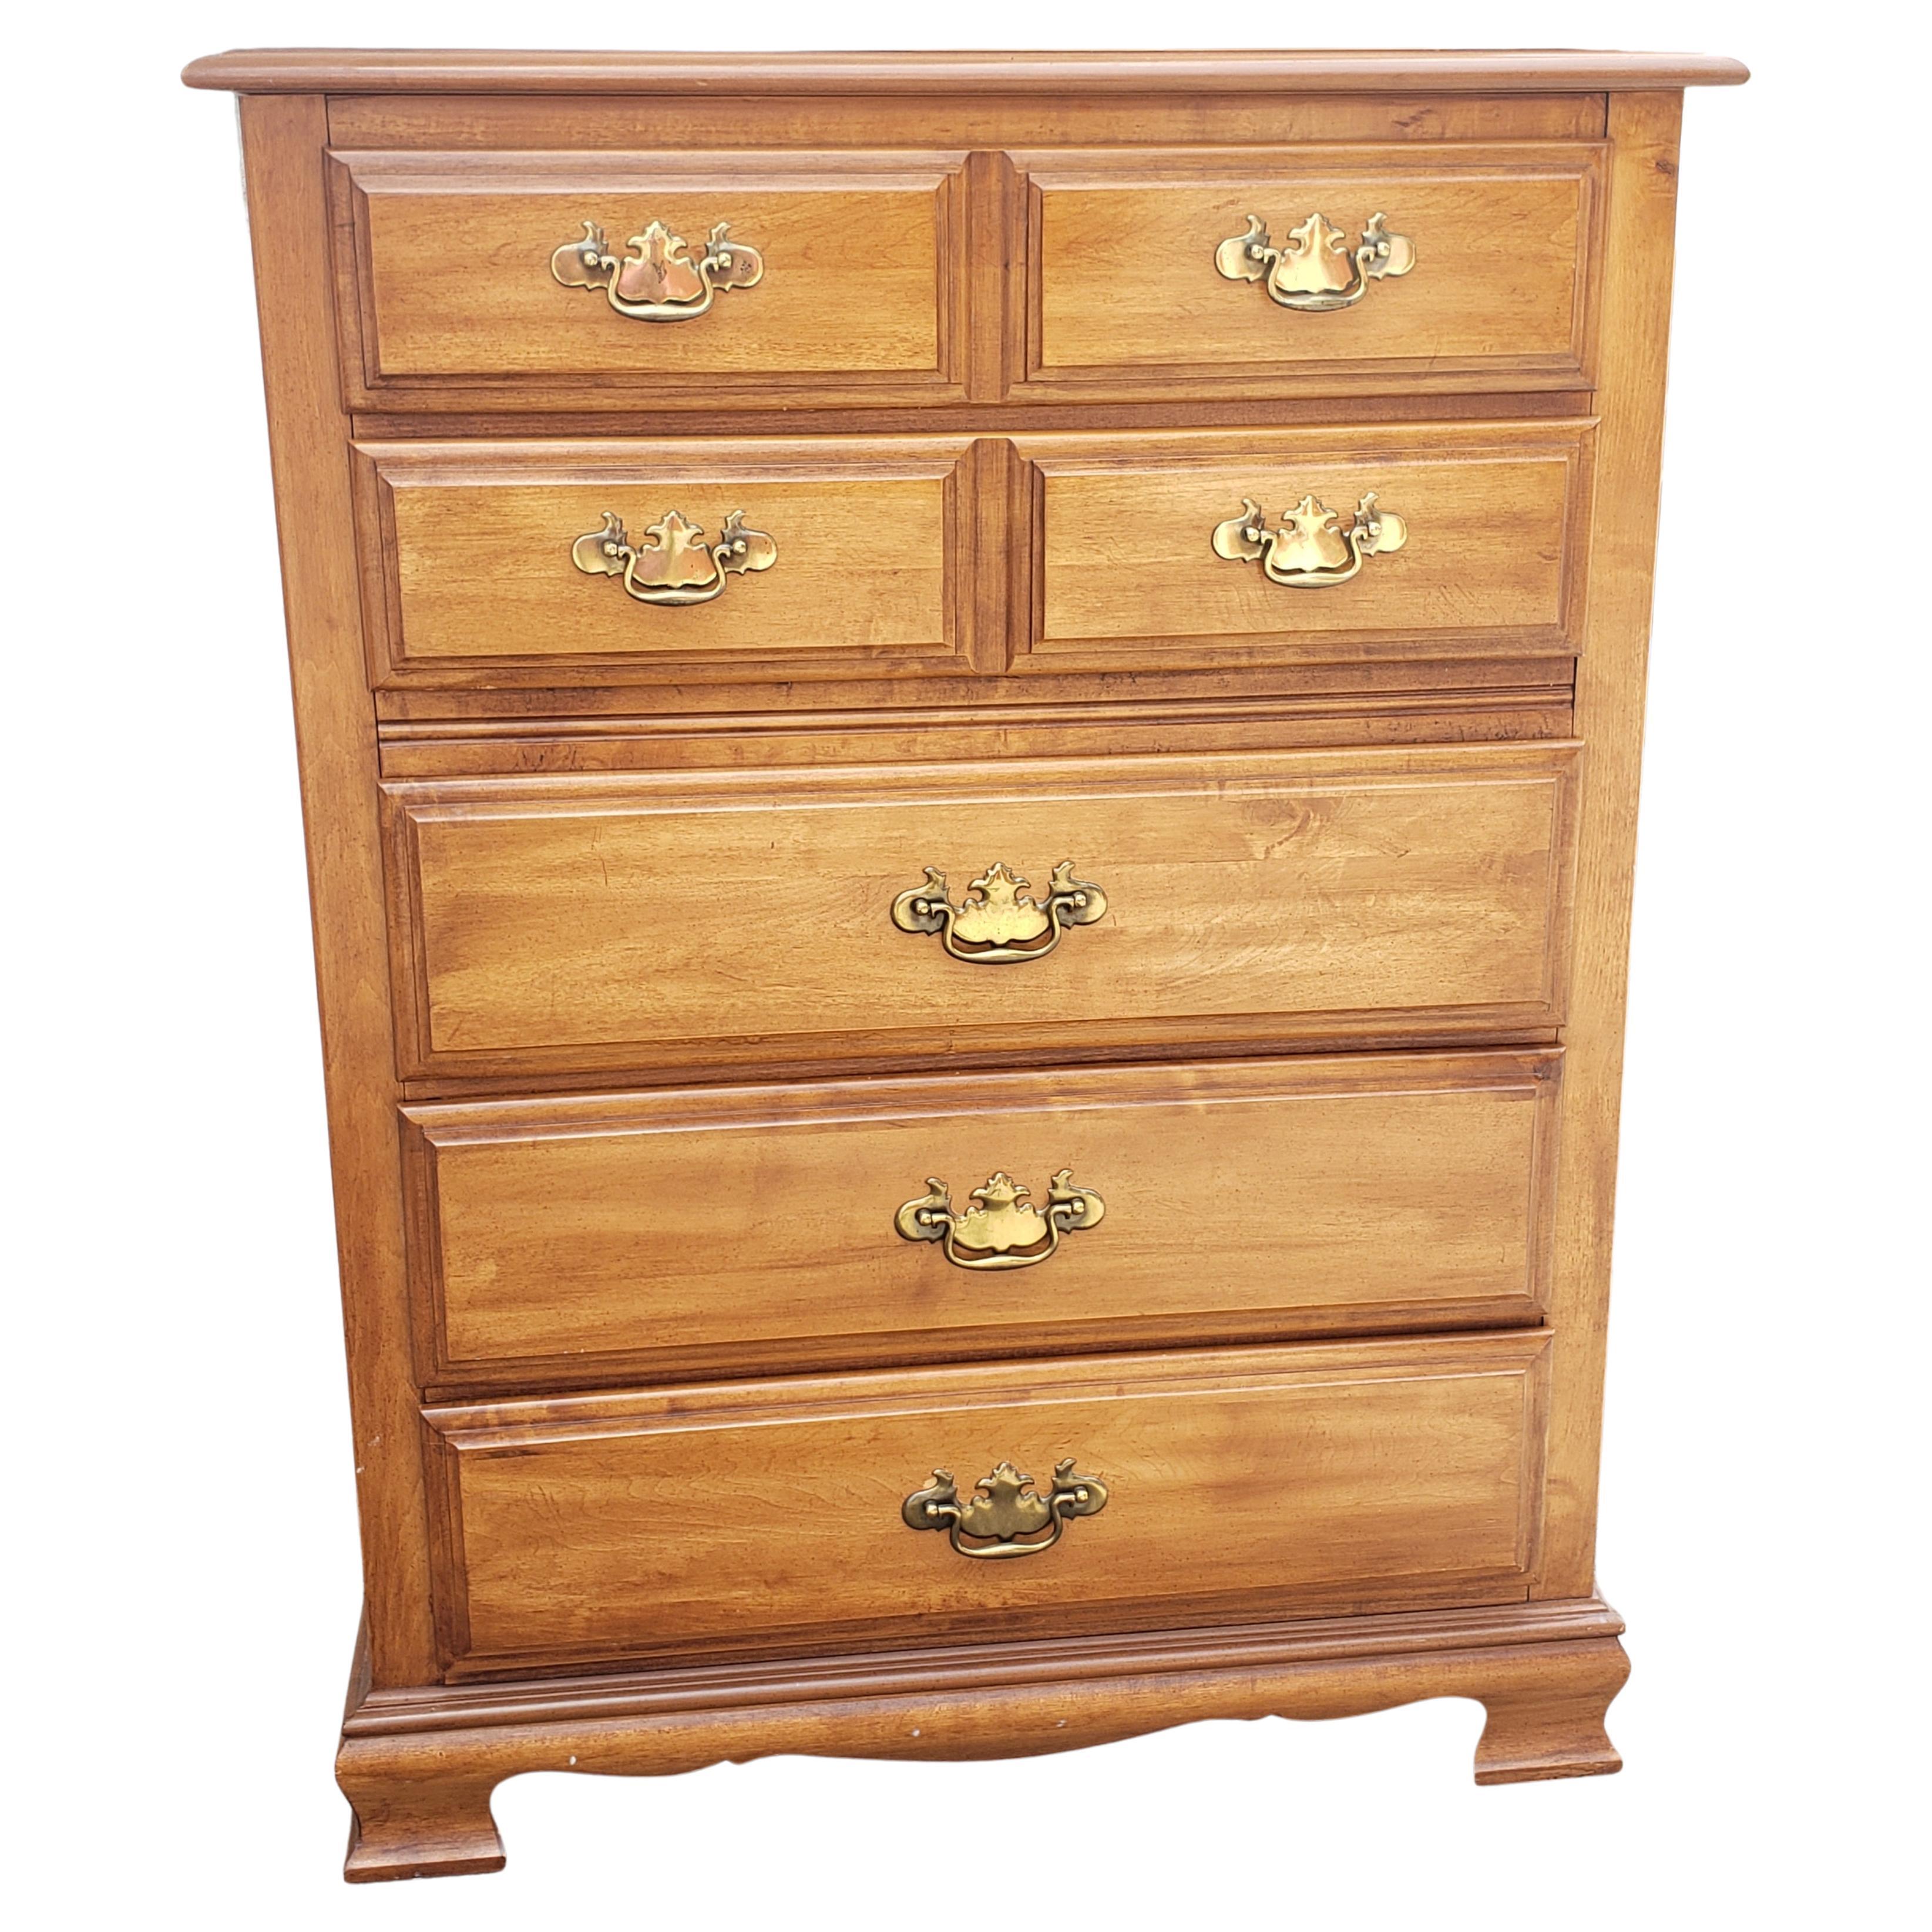 Beautiful bedroom set from the Dixie's Saybrook maple collection.
Includes:
 -A chest of drawers 36